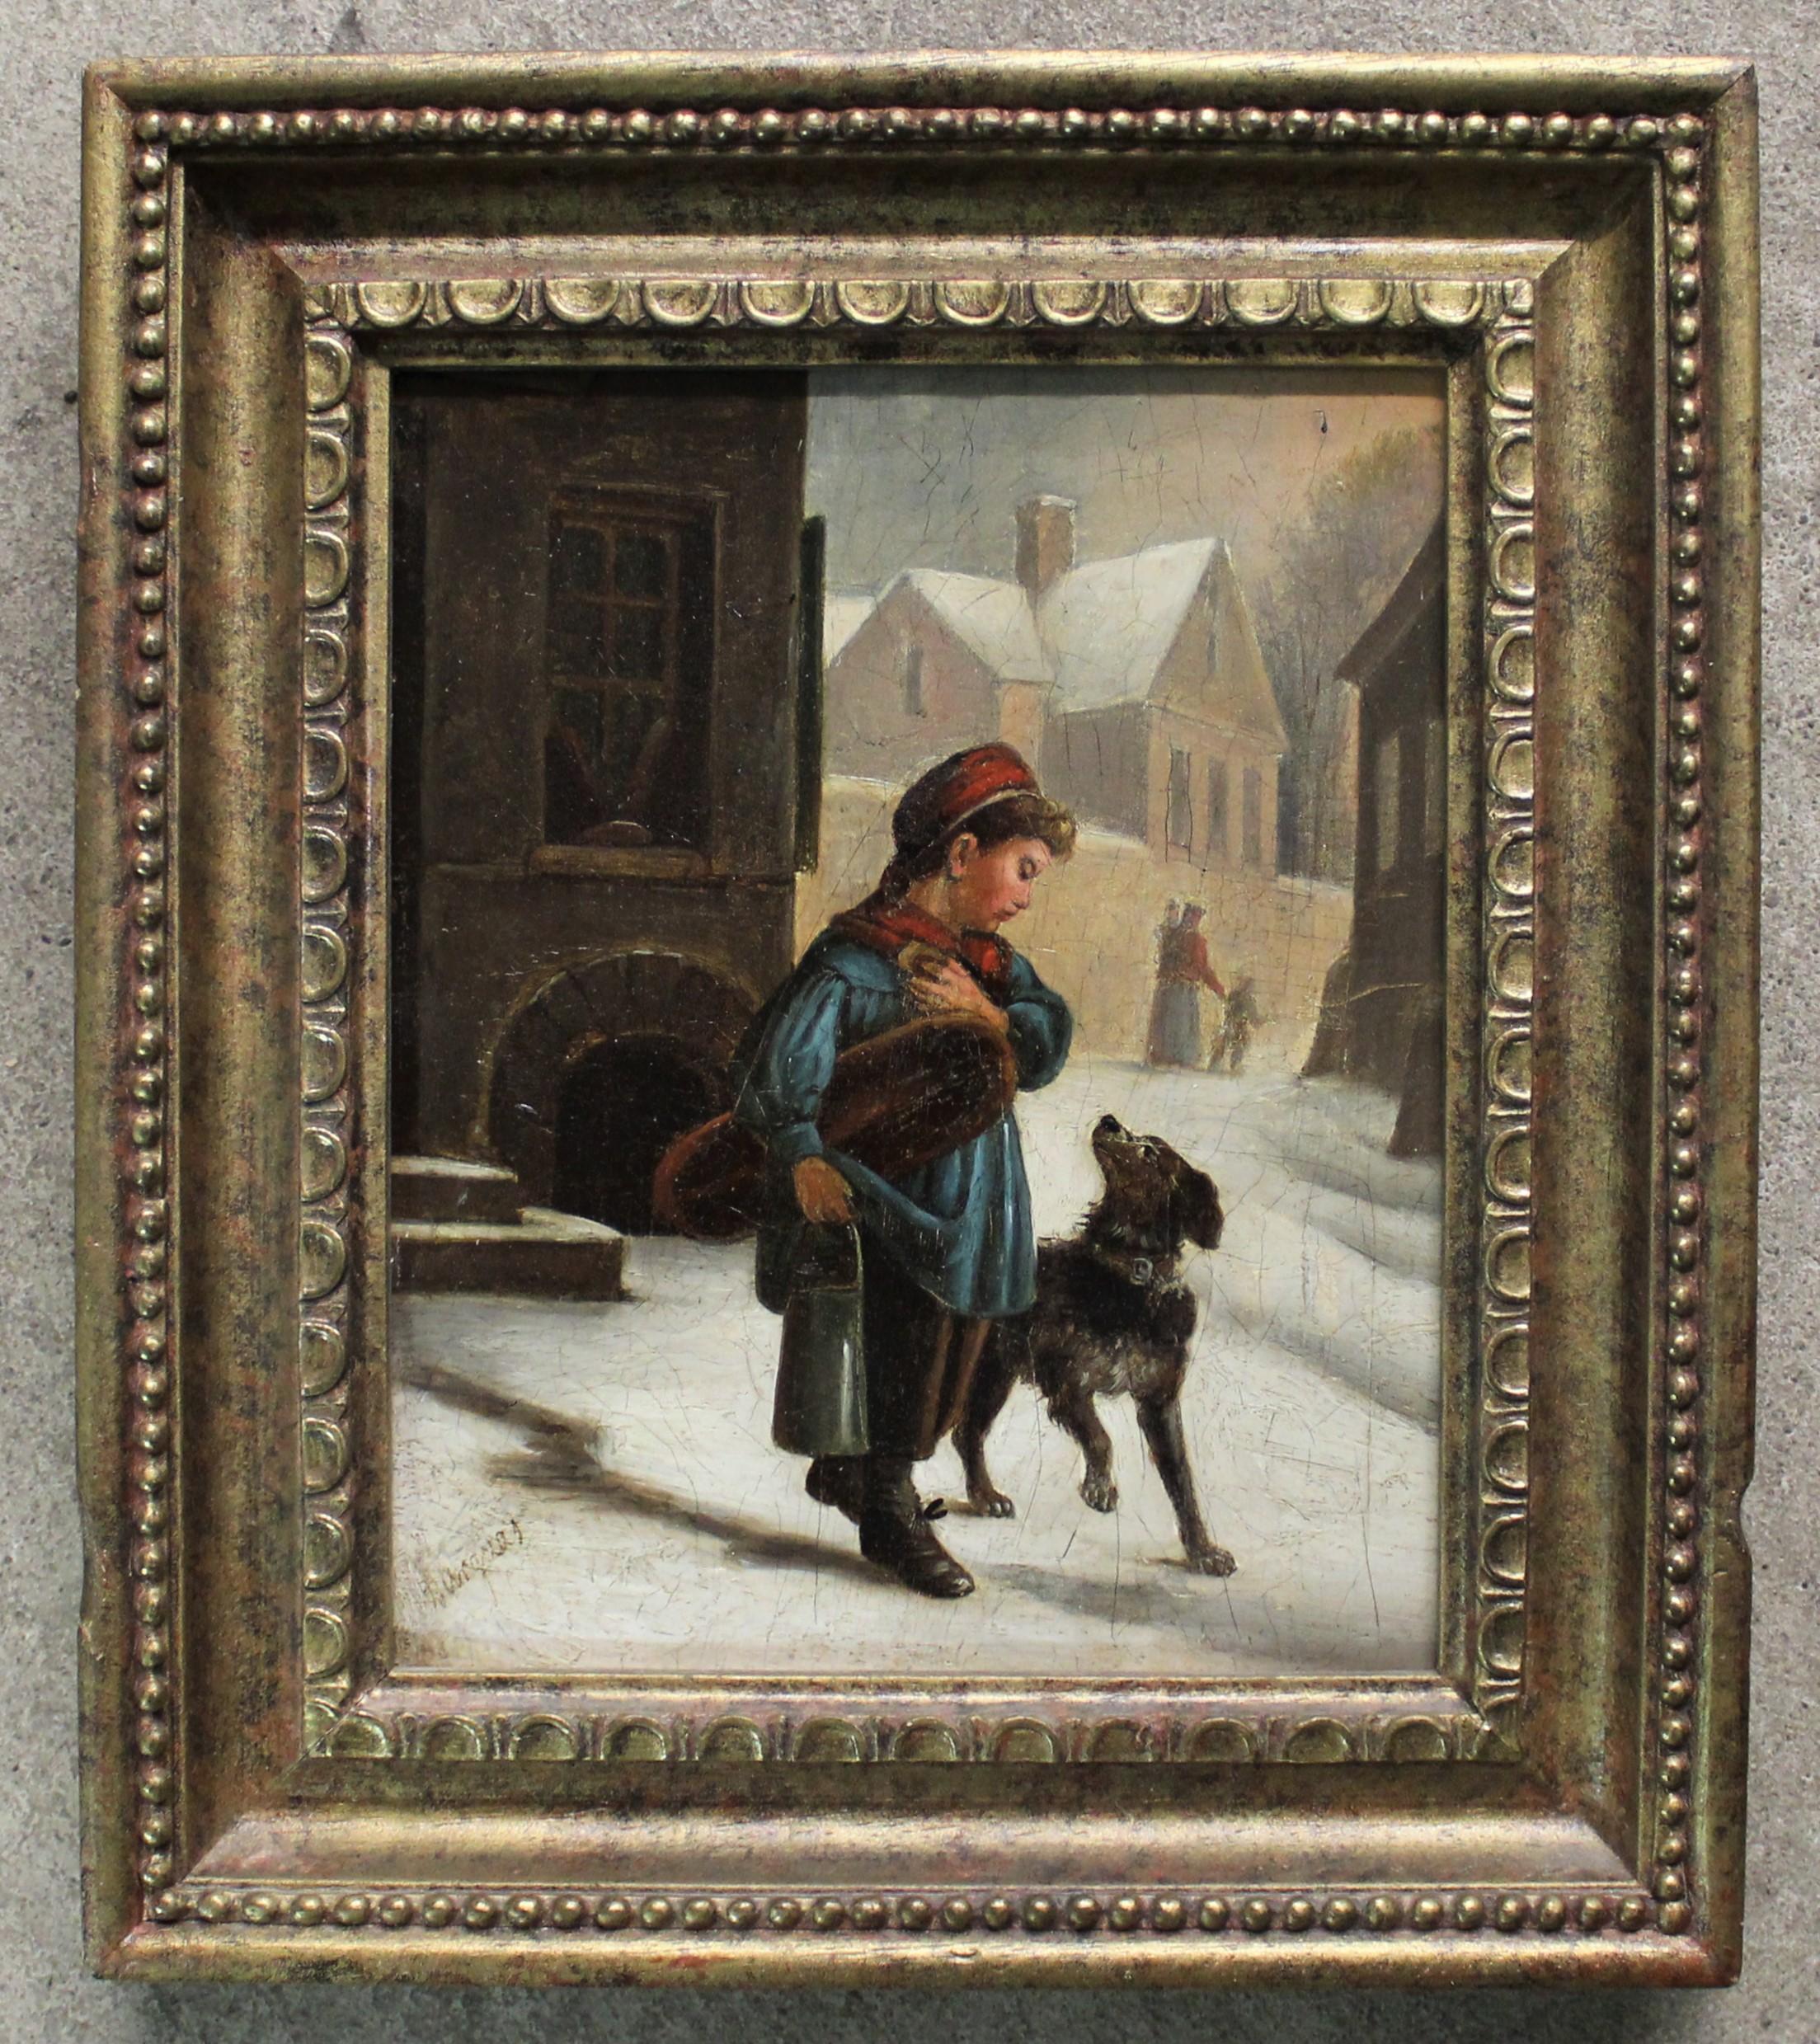 Andre Henri Dargelas (French 1828-1906)
Medium: Oil on metal panel
Size with frame 9.5